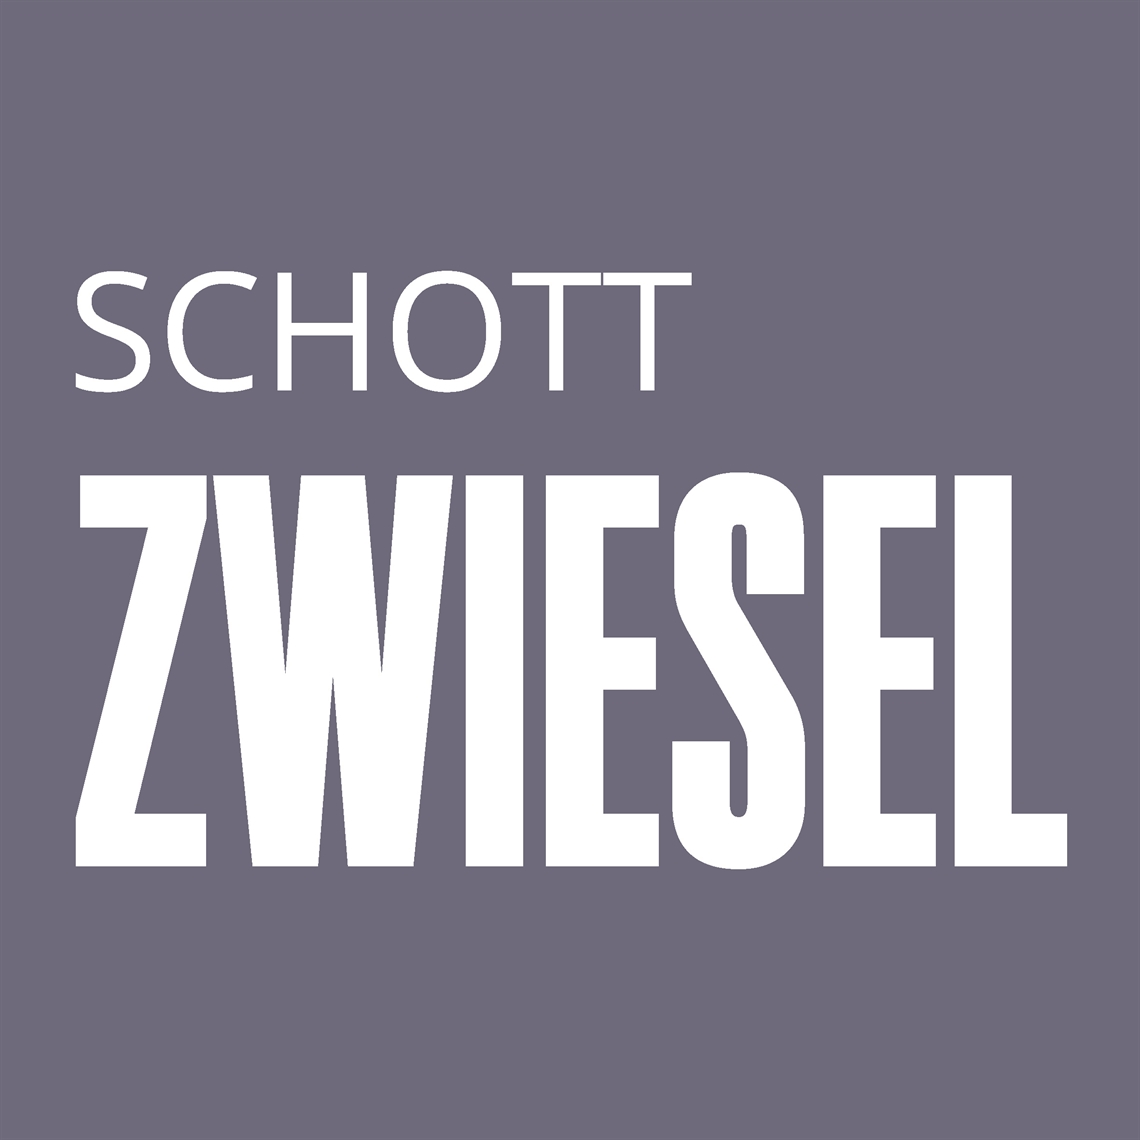 View our collection of Schott Zwiesel Whisky Glasses